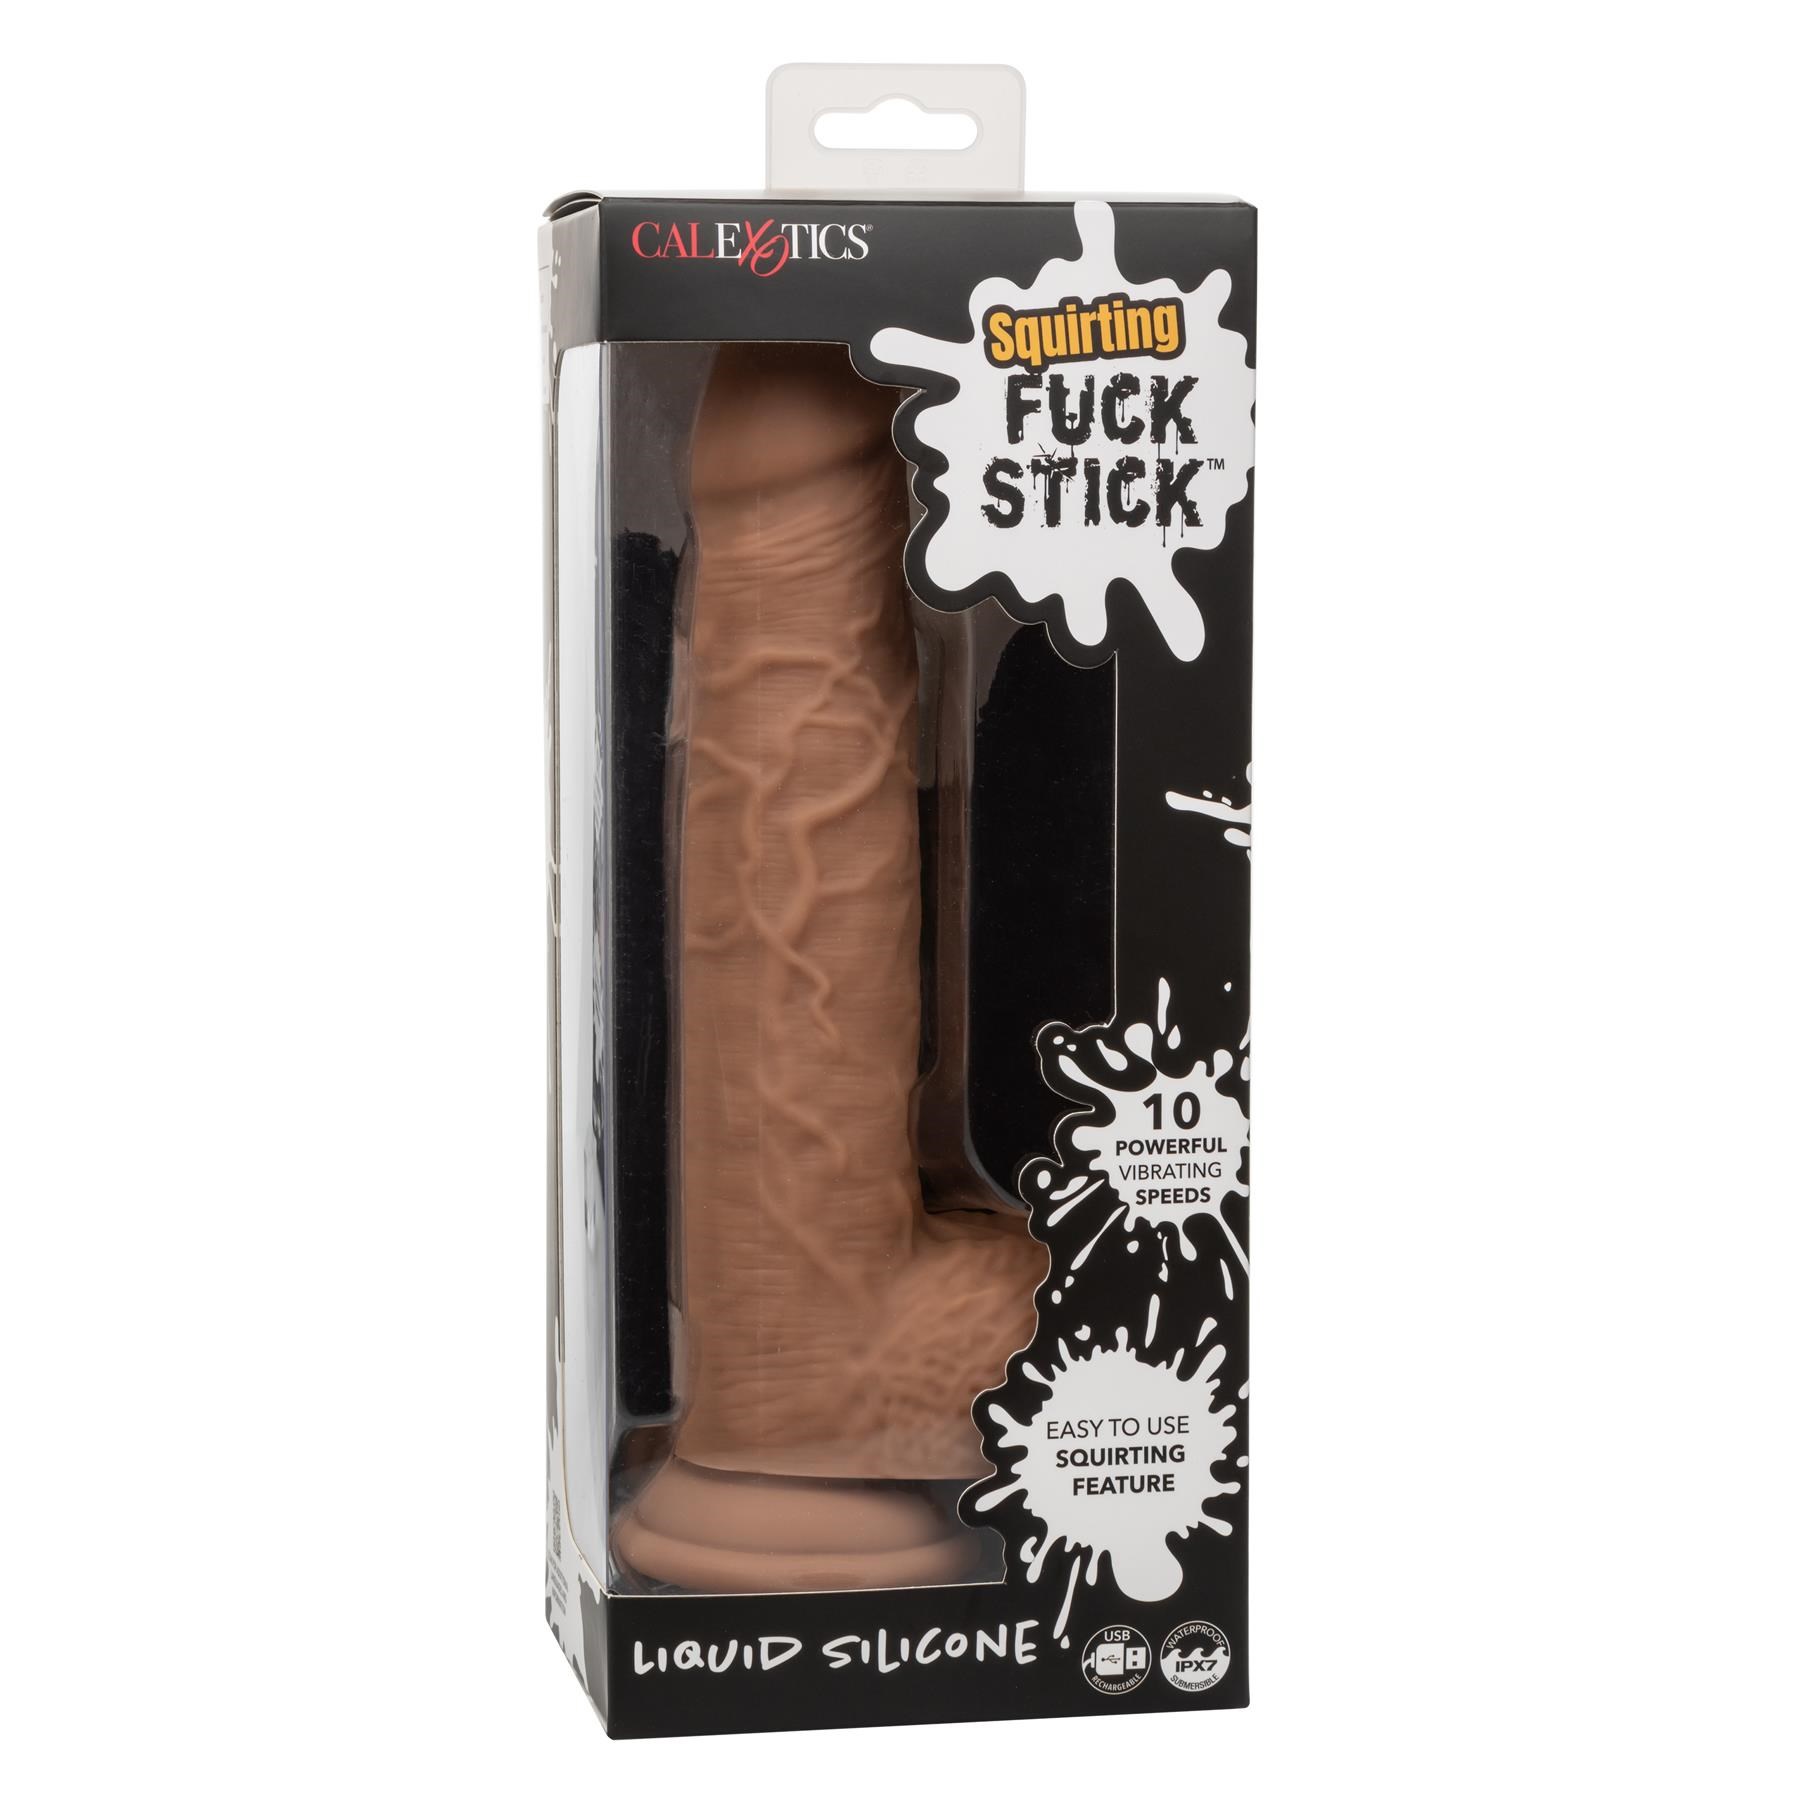 F*ck Stick Squirting and Vibrating Dildo- Packaging- Brown